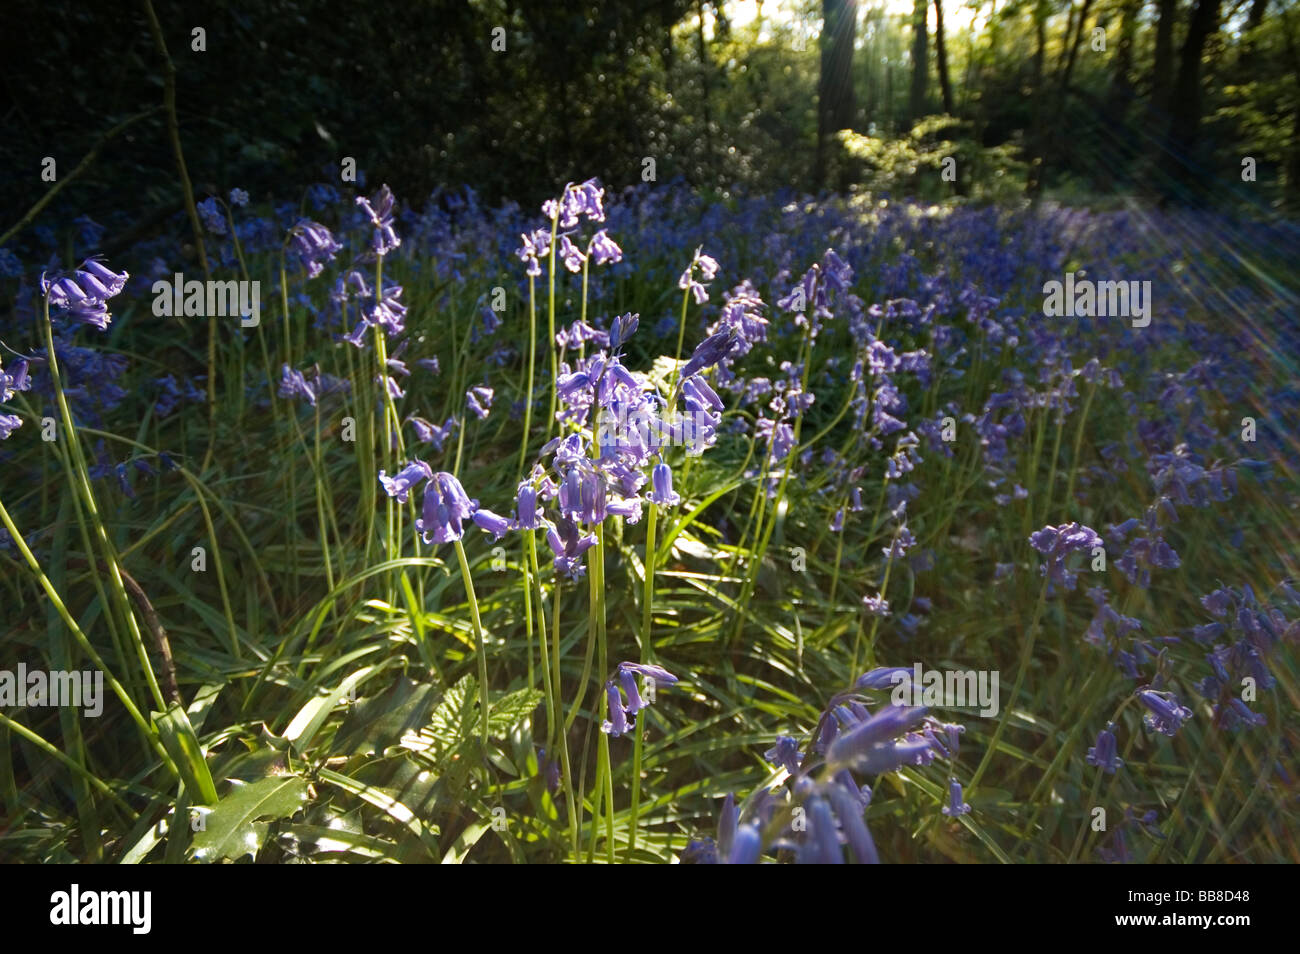 Bluebells (Hyacinthoides non-scripta) backlit by shafts of sunlight in a Kentish wood. Stock Photo